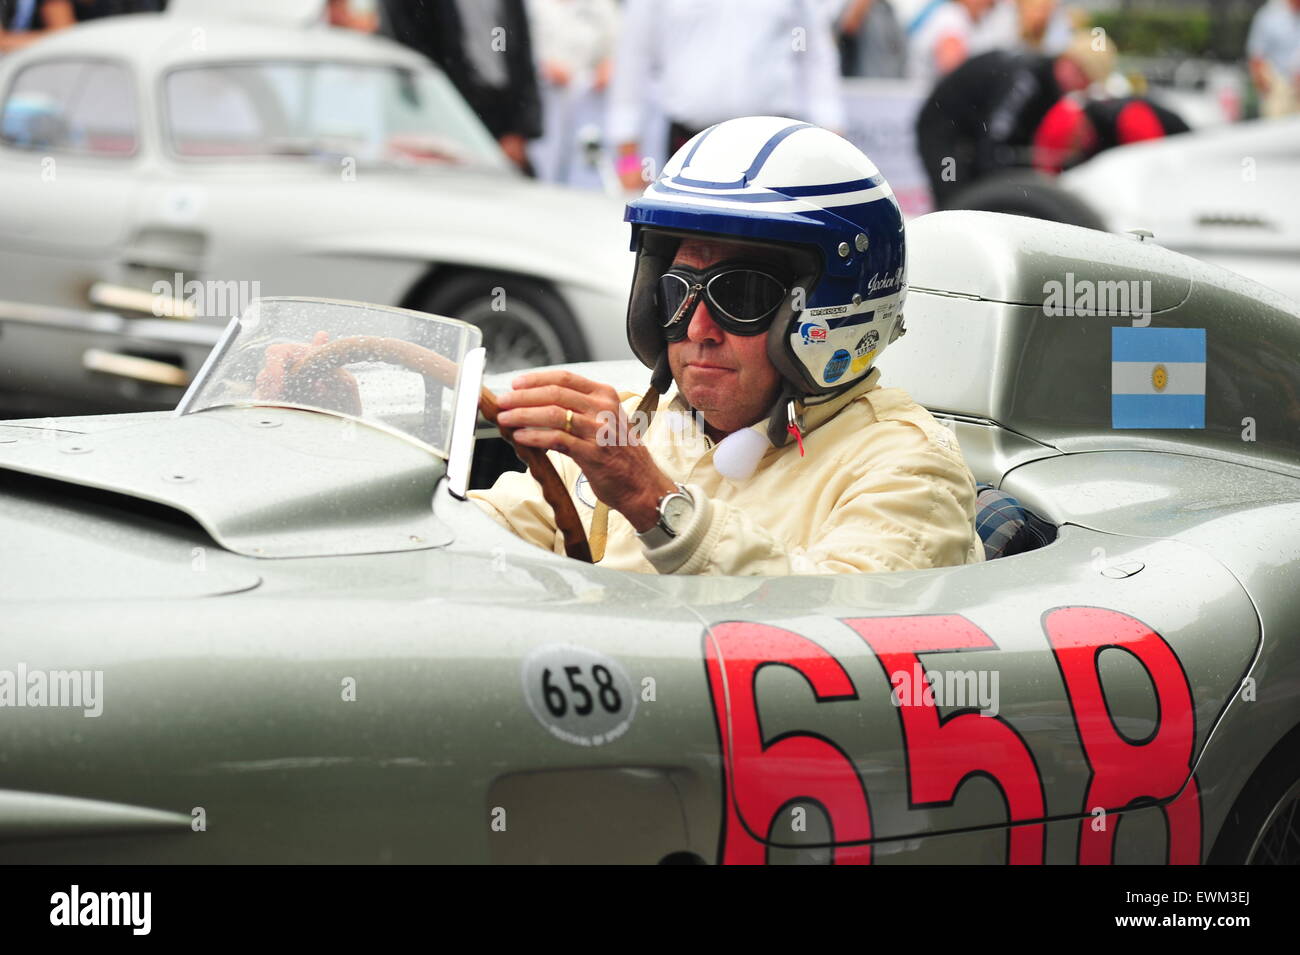 Former F1 driver Jochen Mass in a historic Mercedes at the Goodwood Festival of Speed. Racing drivers, celebrities and thousands of members of the public attended the Goodwood Festival of Speed to see modern and old racing cars and bikes in action. Stock Photo